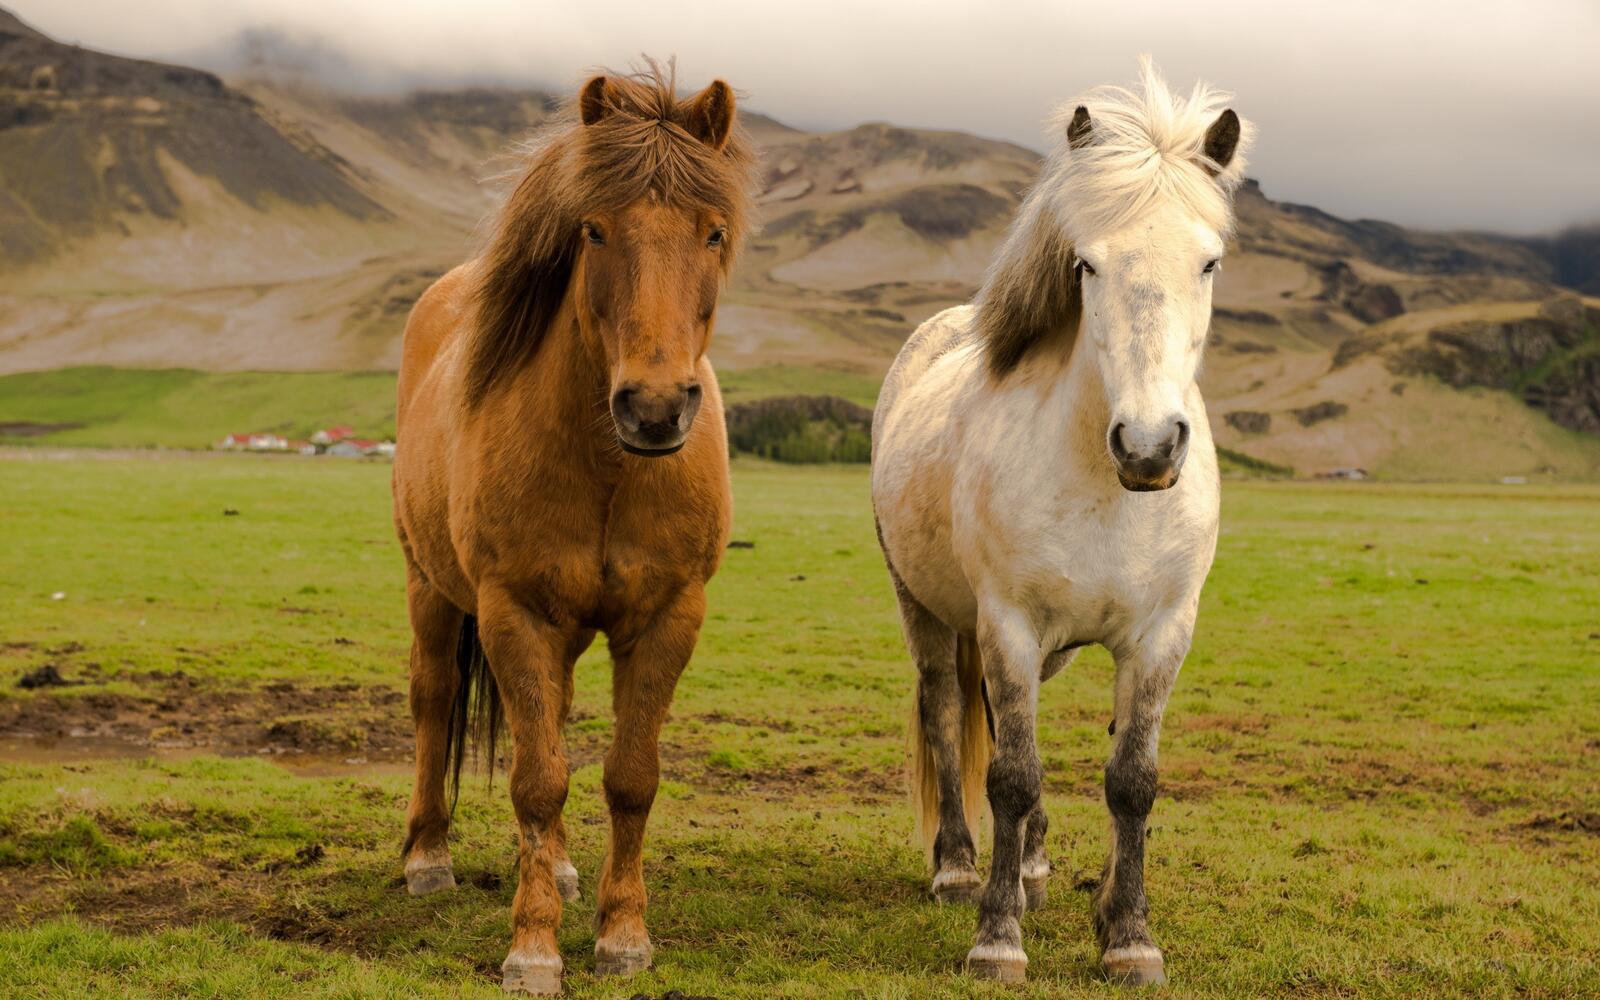 Two horses in the pasture